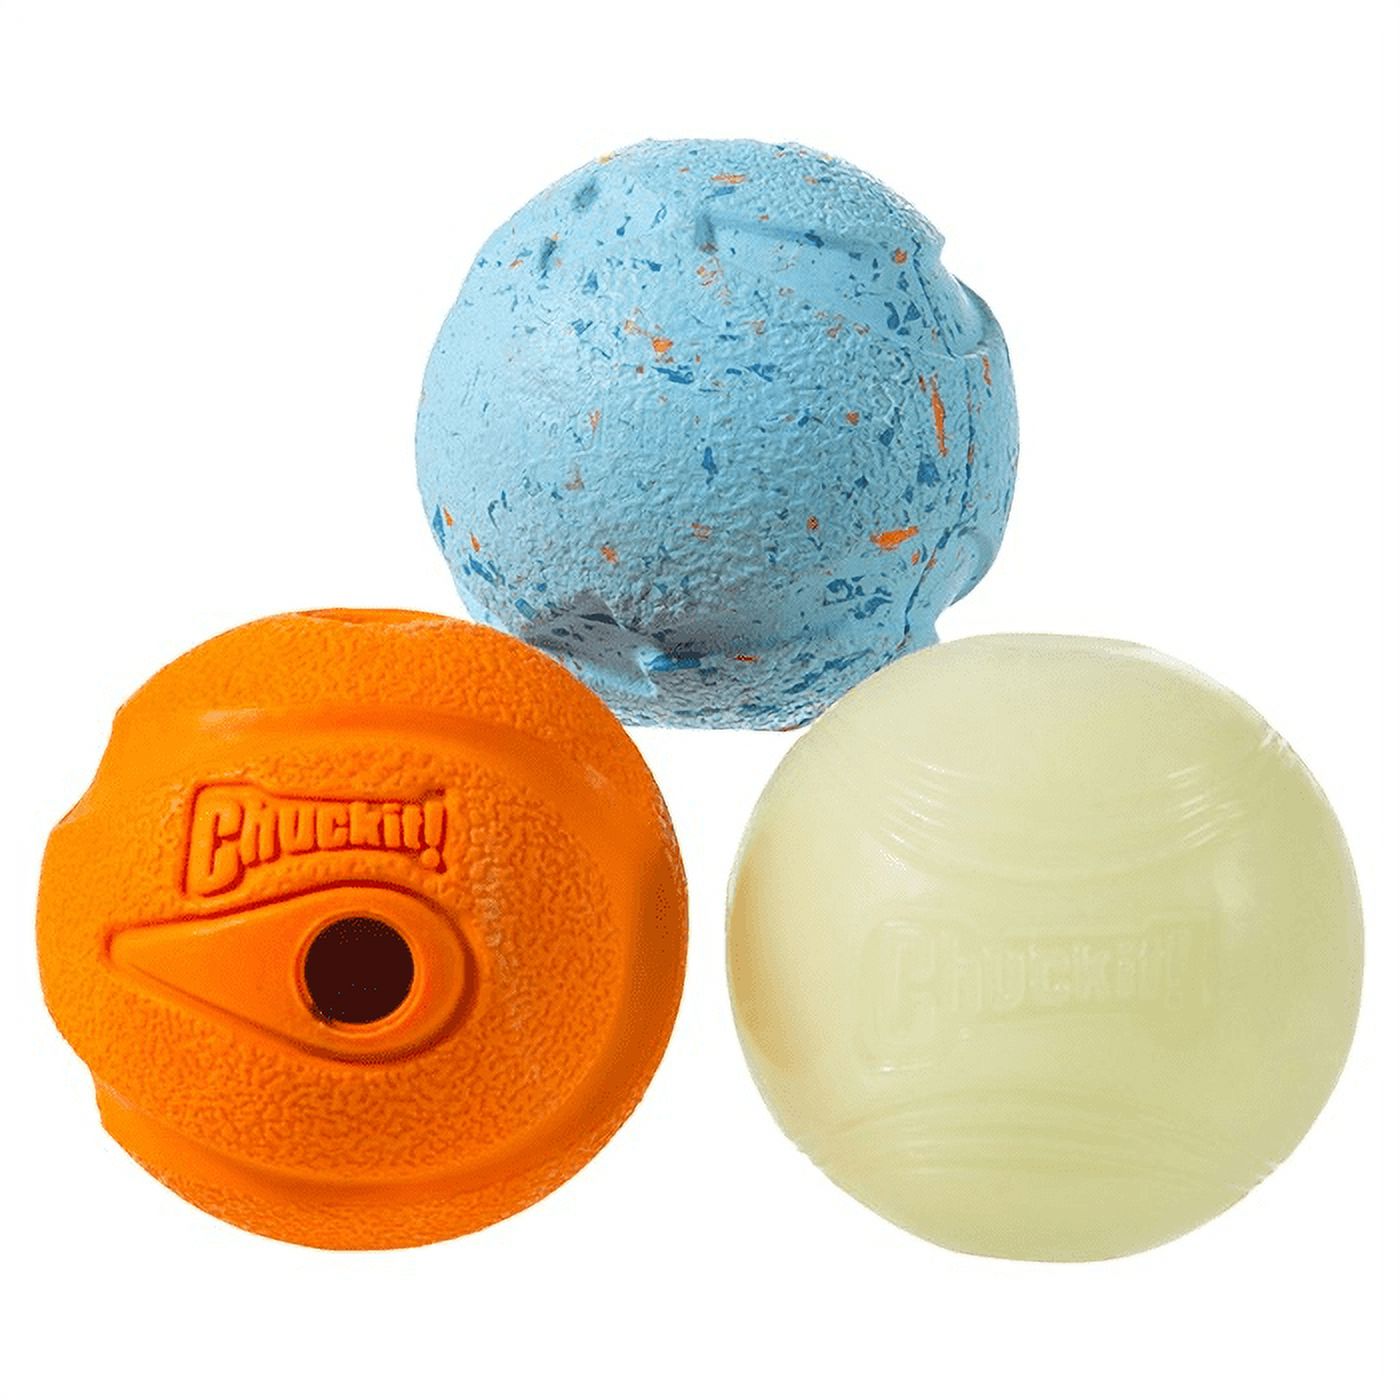 Chuckit Fetch Medley Dog Ball Dog Toys, Medium (2.5 Inch) Pack of 3, for Medium Breeds, Includes Whistler, Max Glow and Rebounce Balls - image 4 of 8